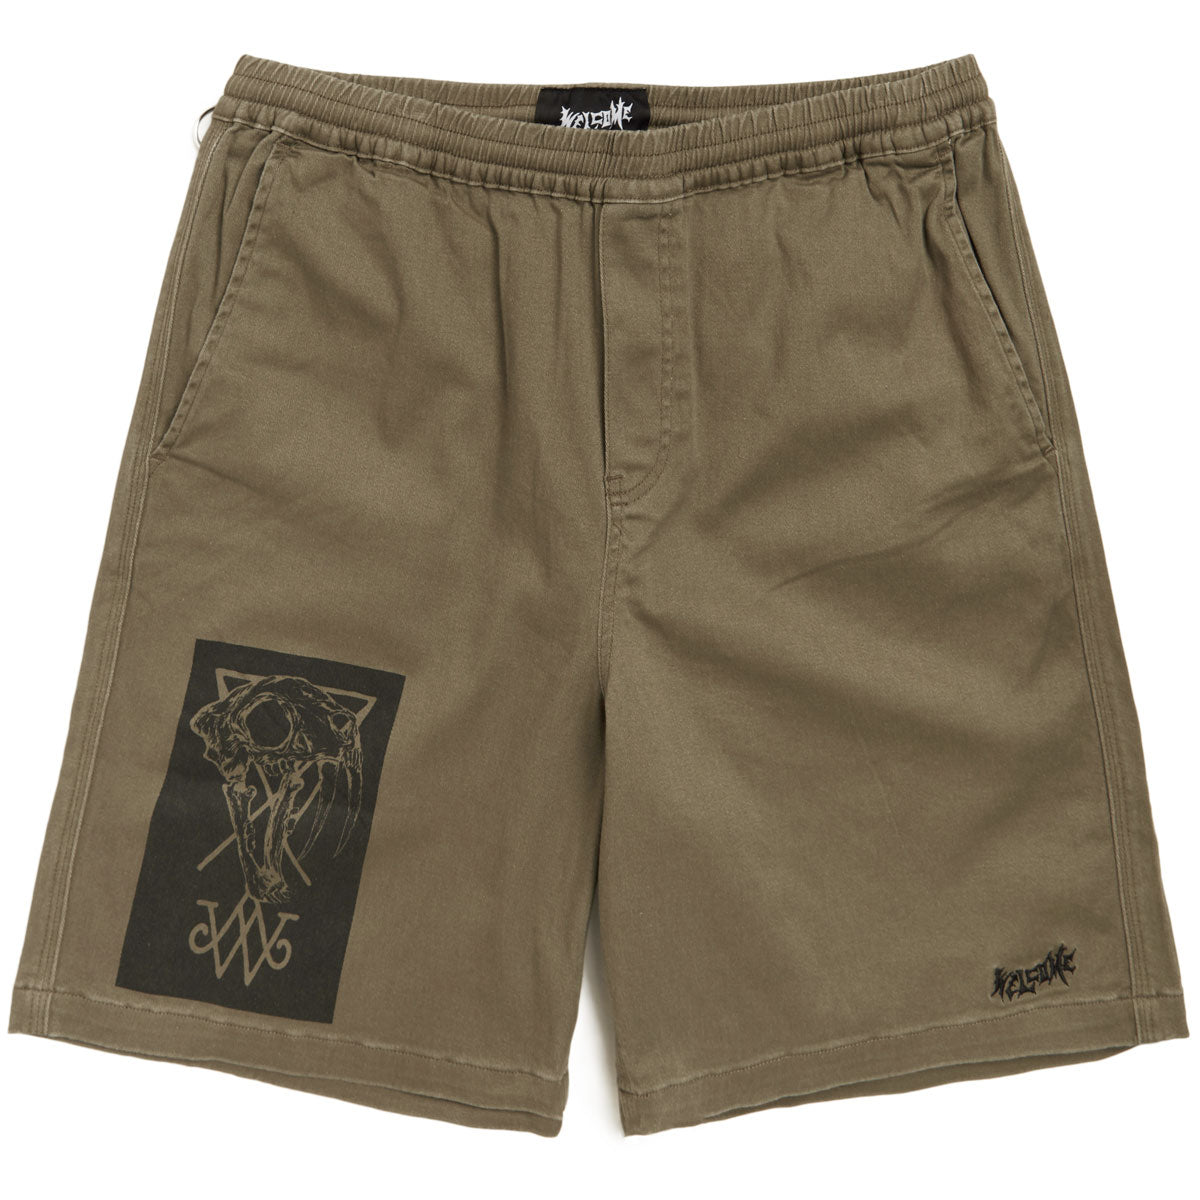 Welcome Soft Core 2 Printed Shorts - Stone image 1